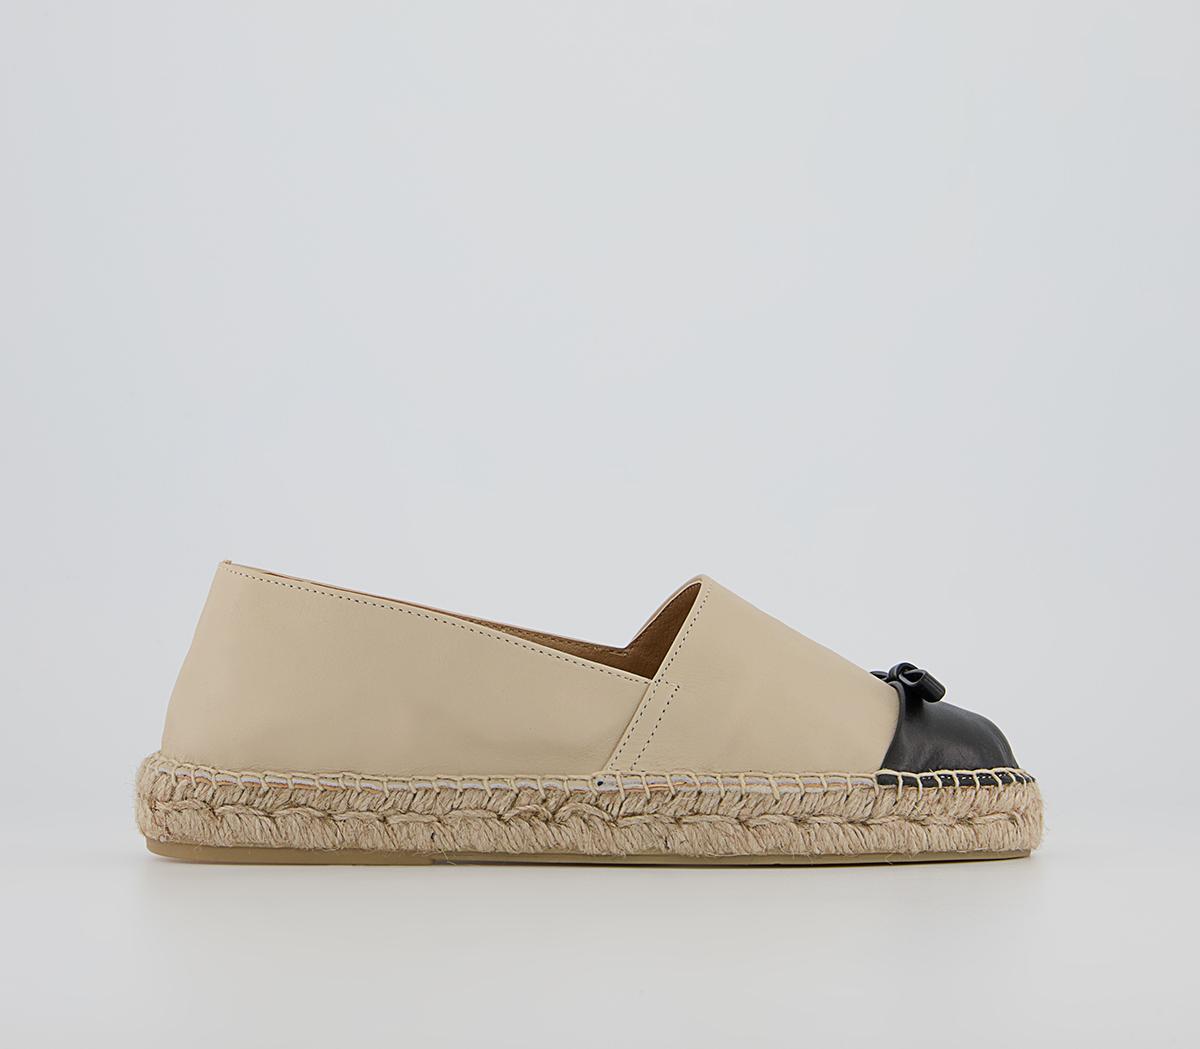 Office Foal Bow Toe Cap Espadrilles Nude And Black Leather Mix - Women ...